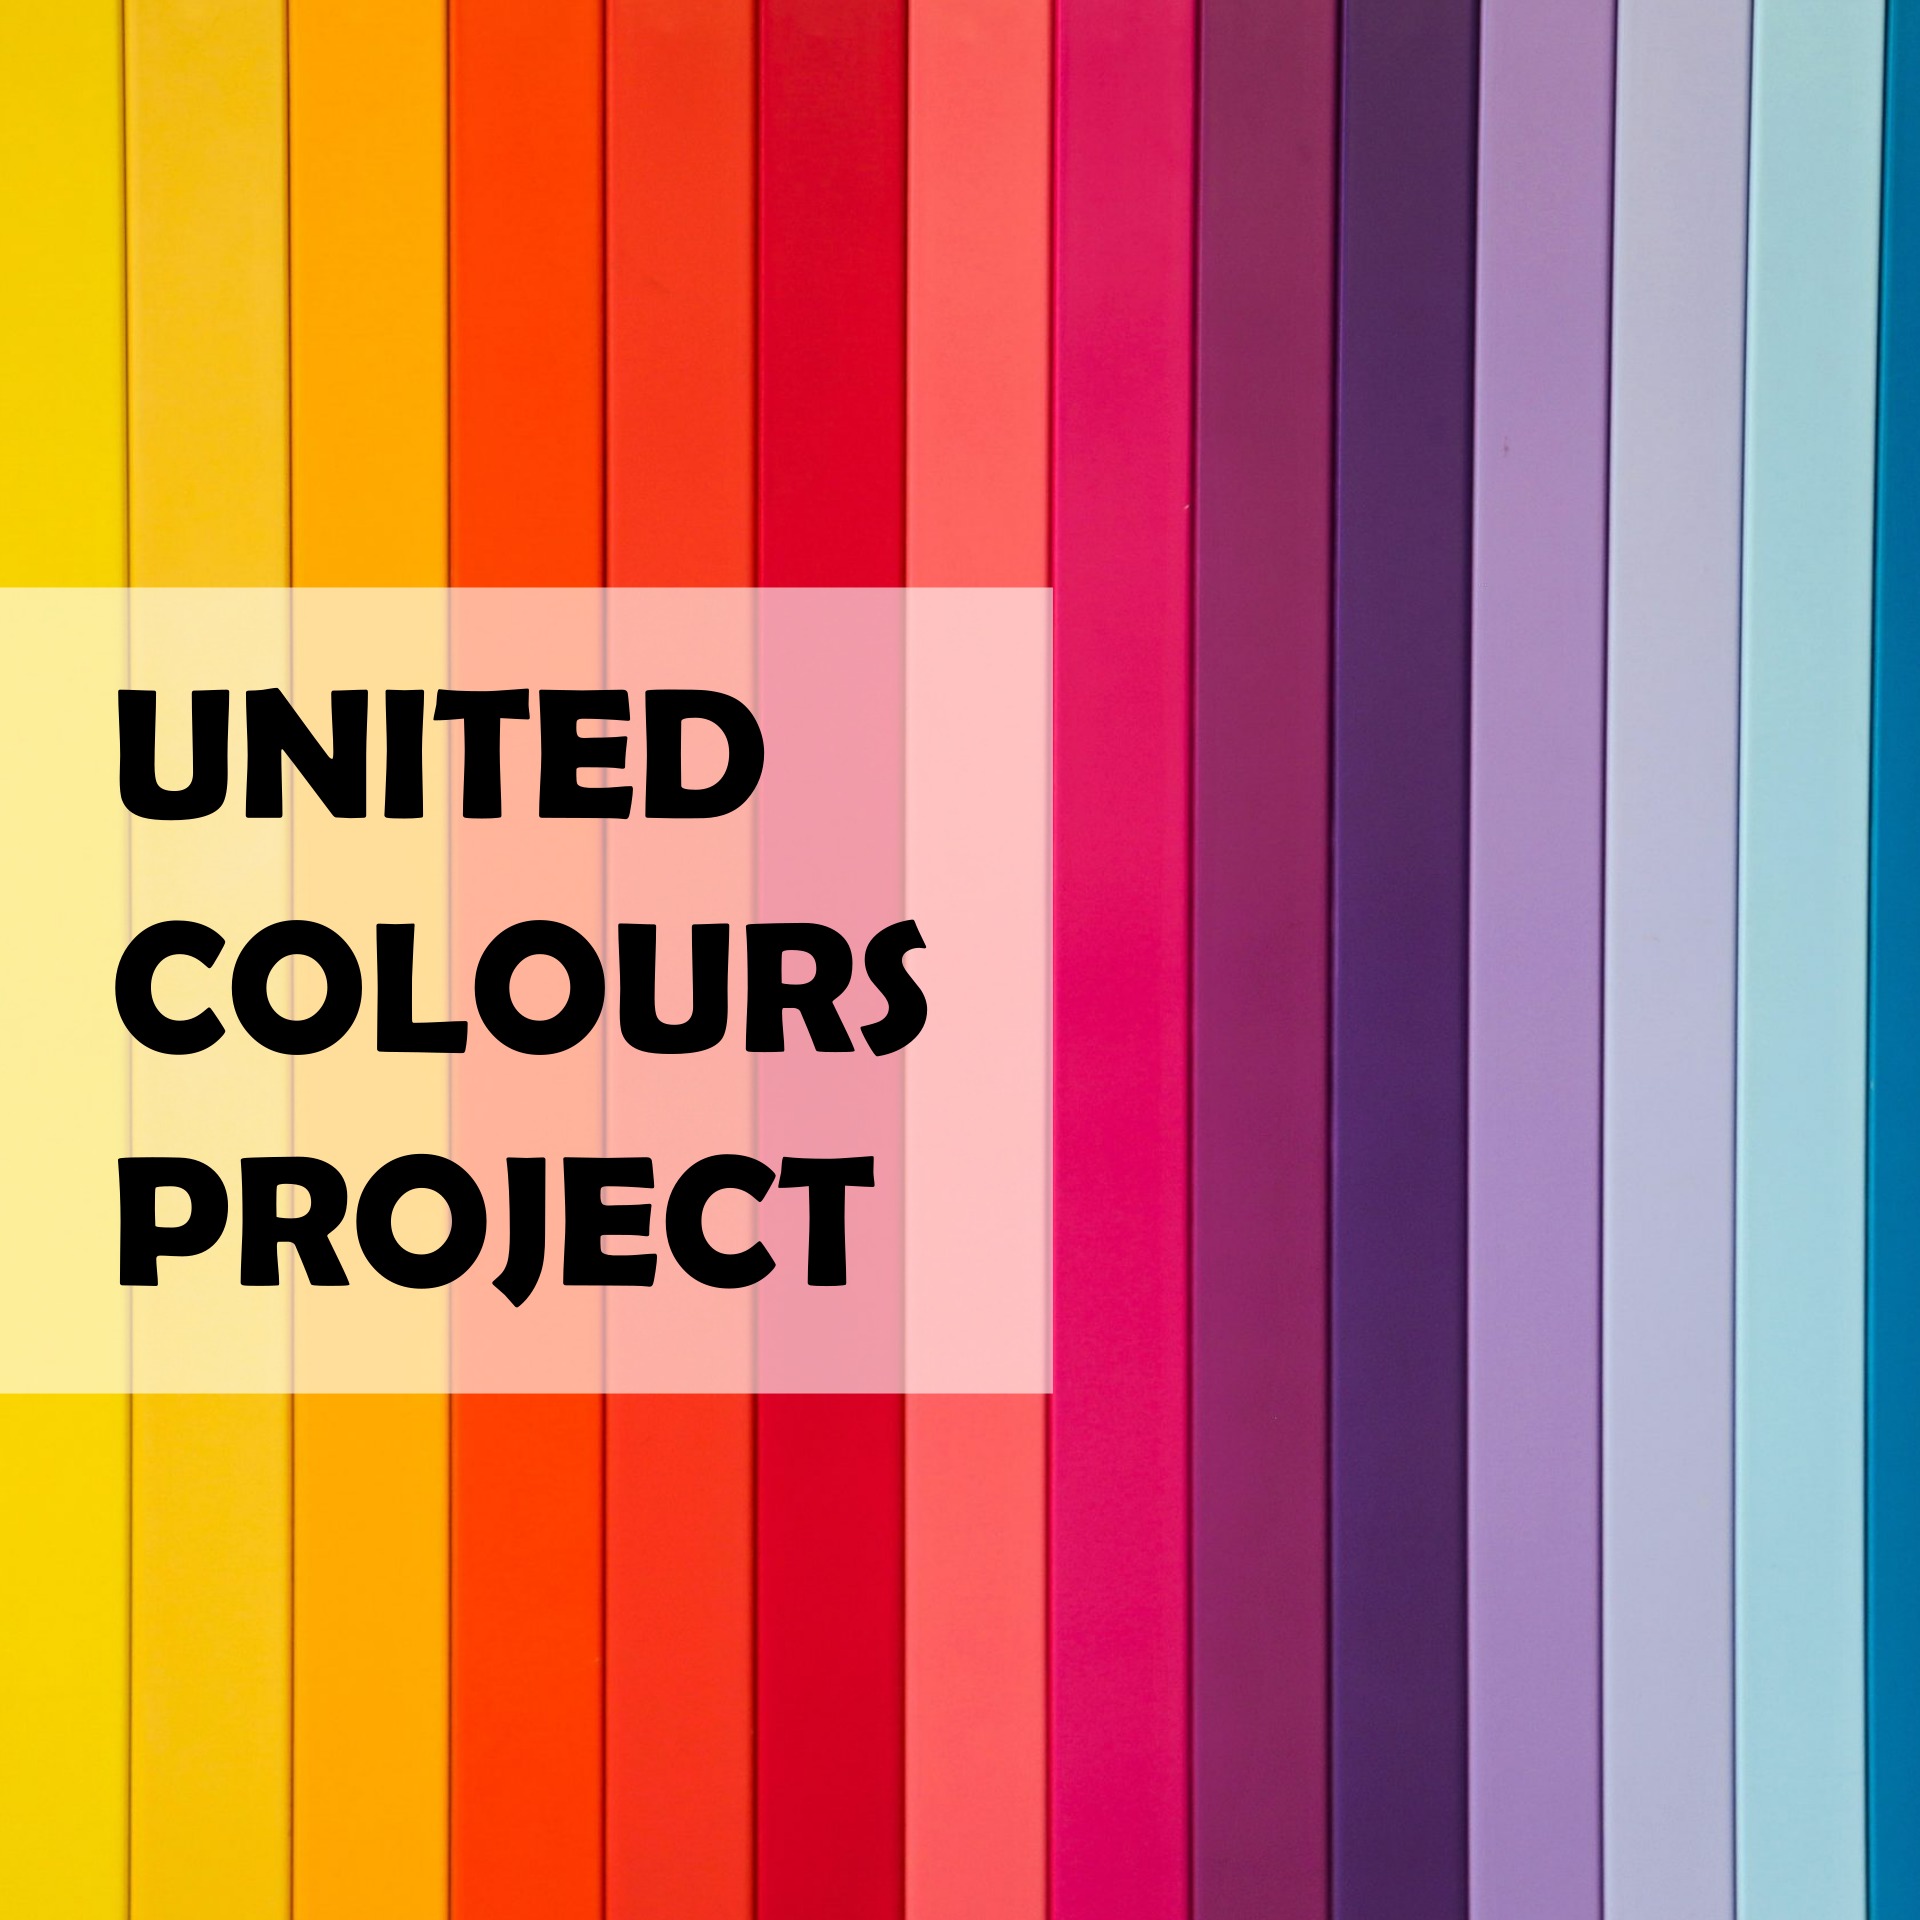 UNITED COLOURS PROJECT